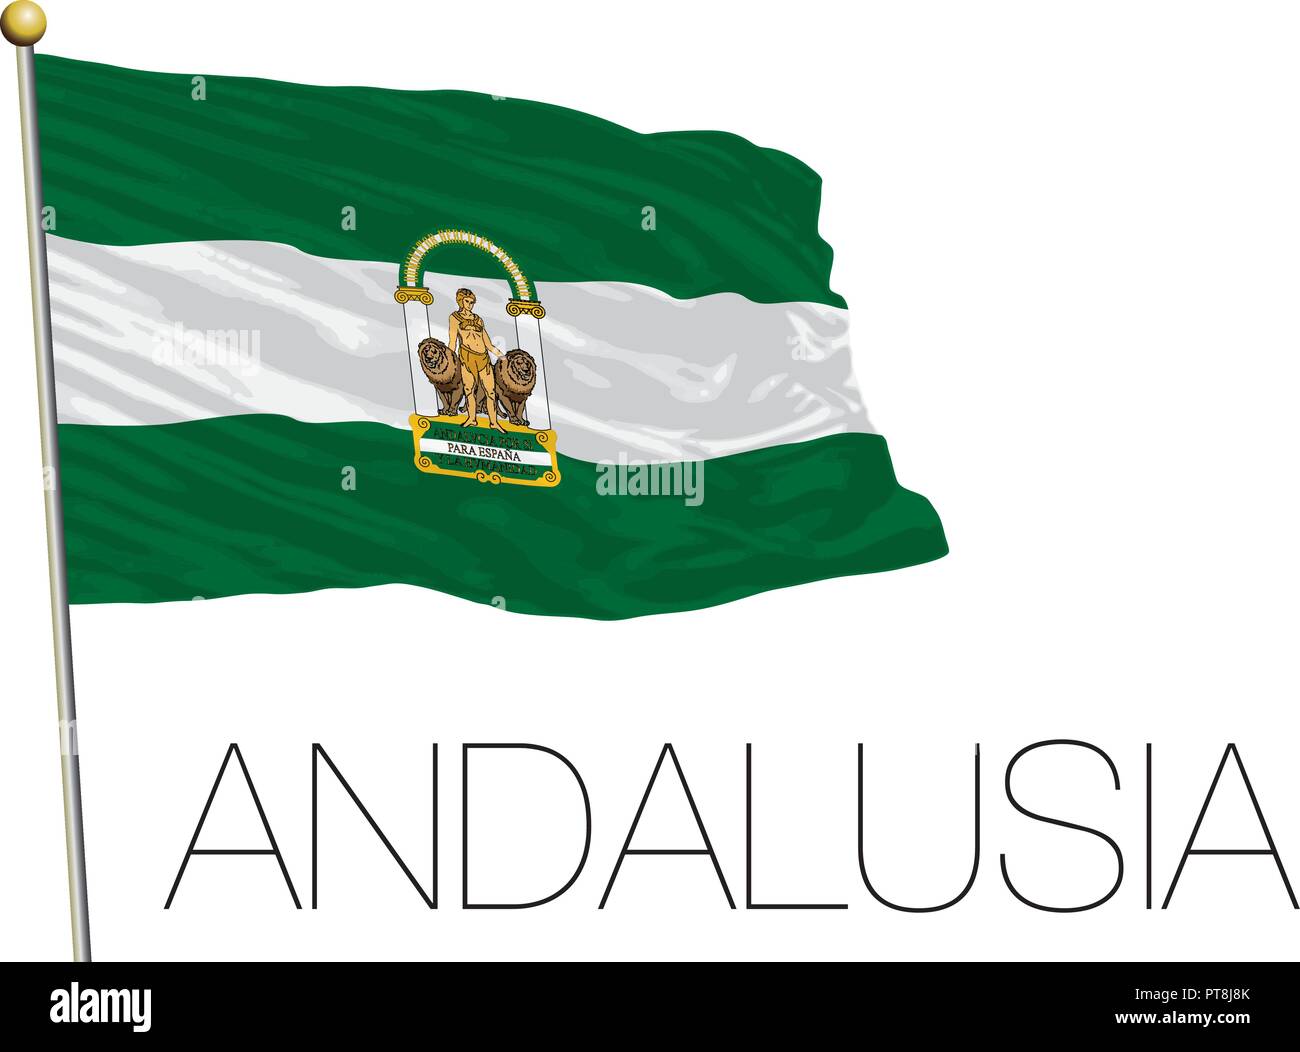 Andalusia official regional flag, Spain, vector illustration Stock Vector